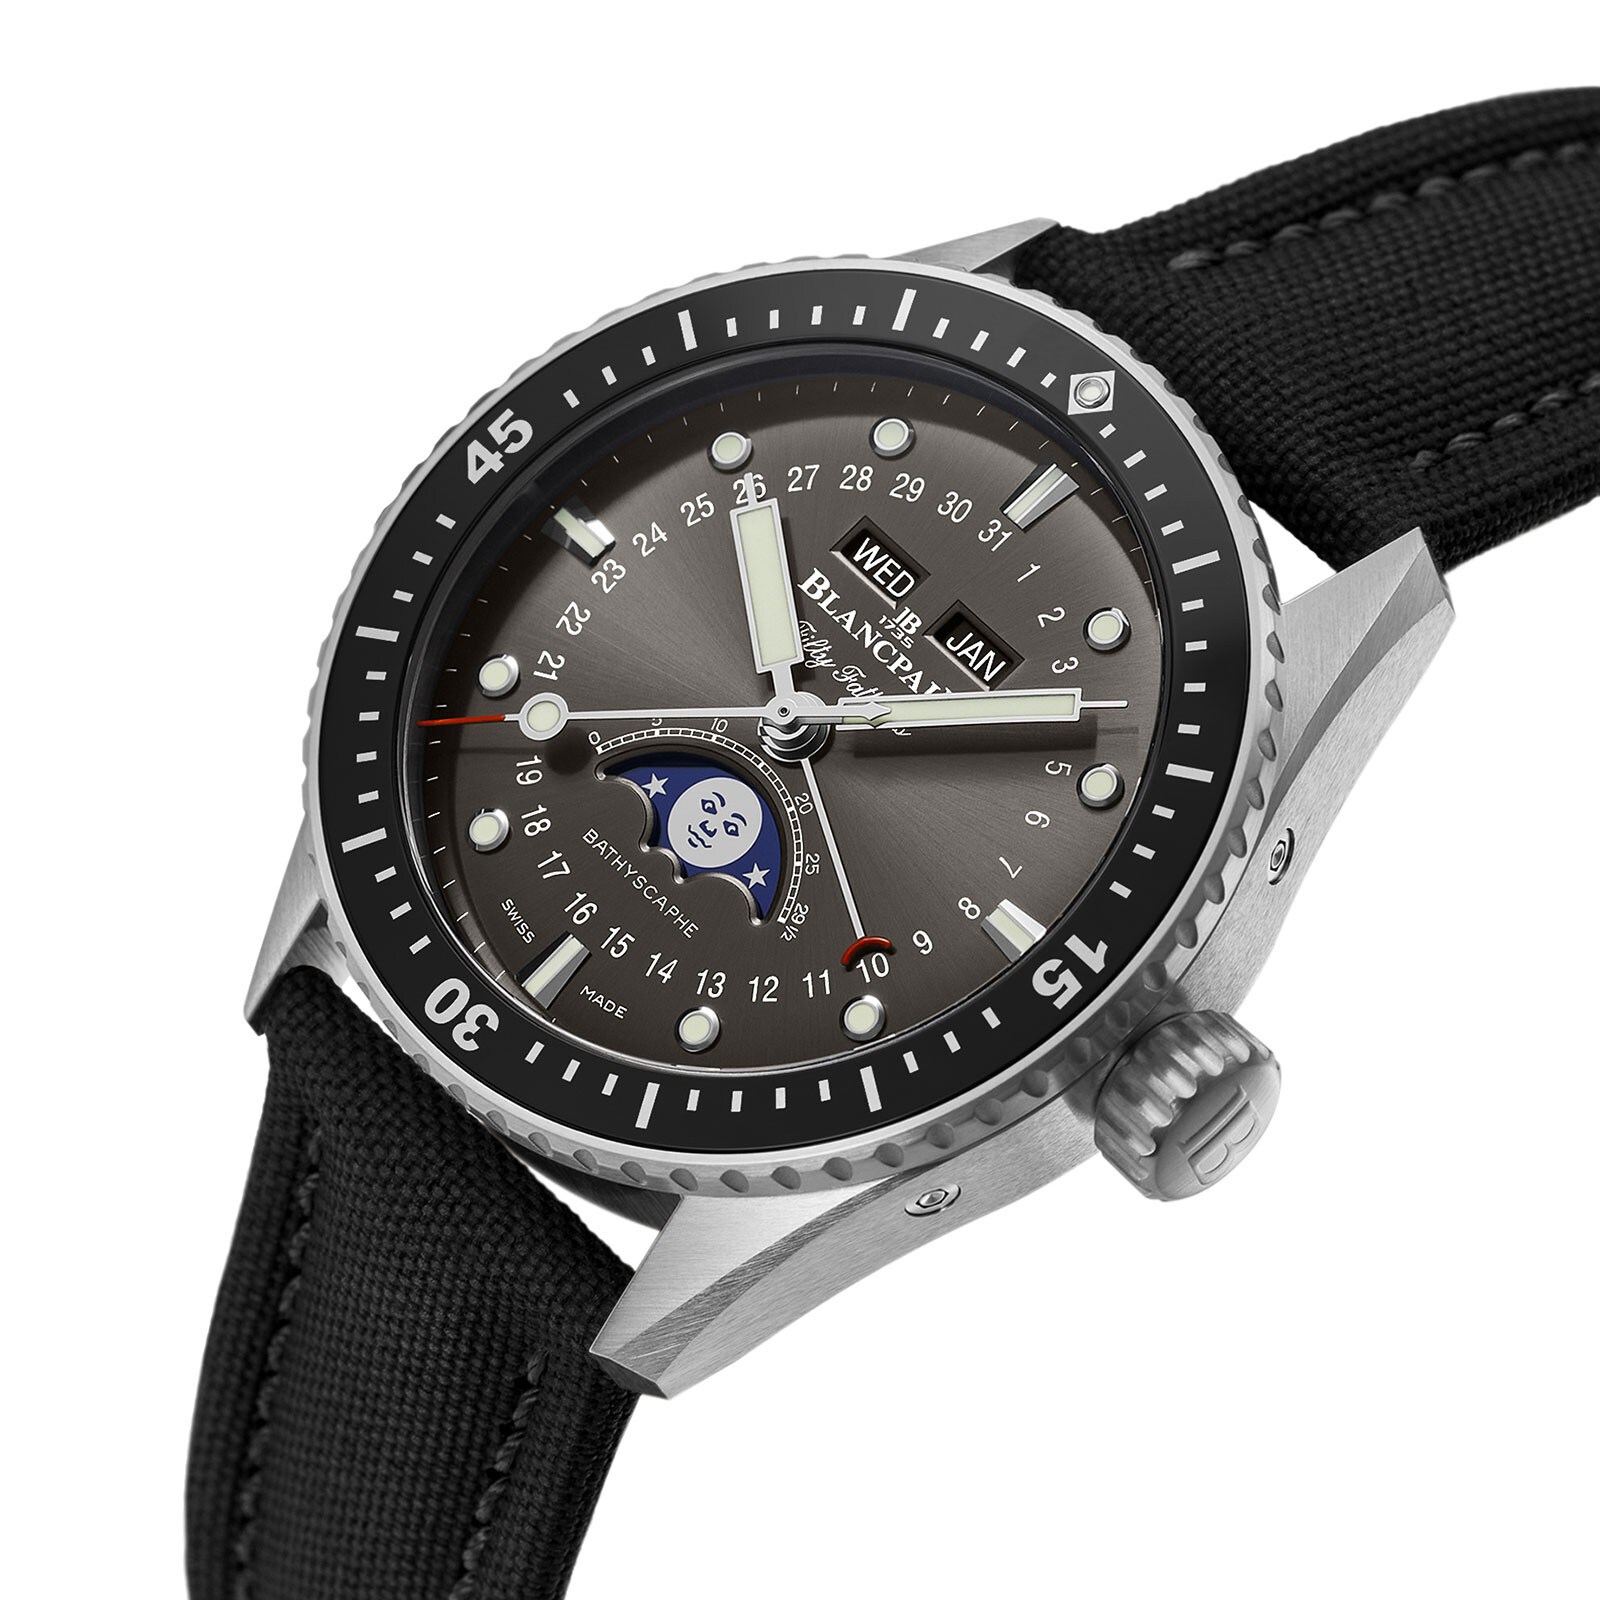 Blancpain Fifty Fathoms Bathyscaphe ceramic insert and Ceragold  5000-36S30-B52A - Exquisite Timepieces